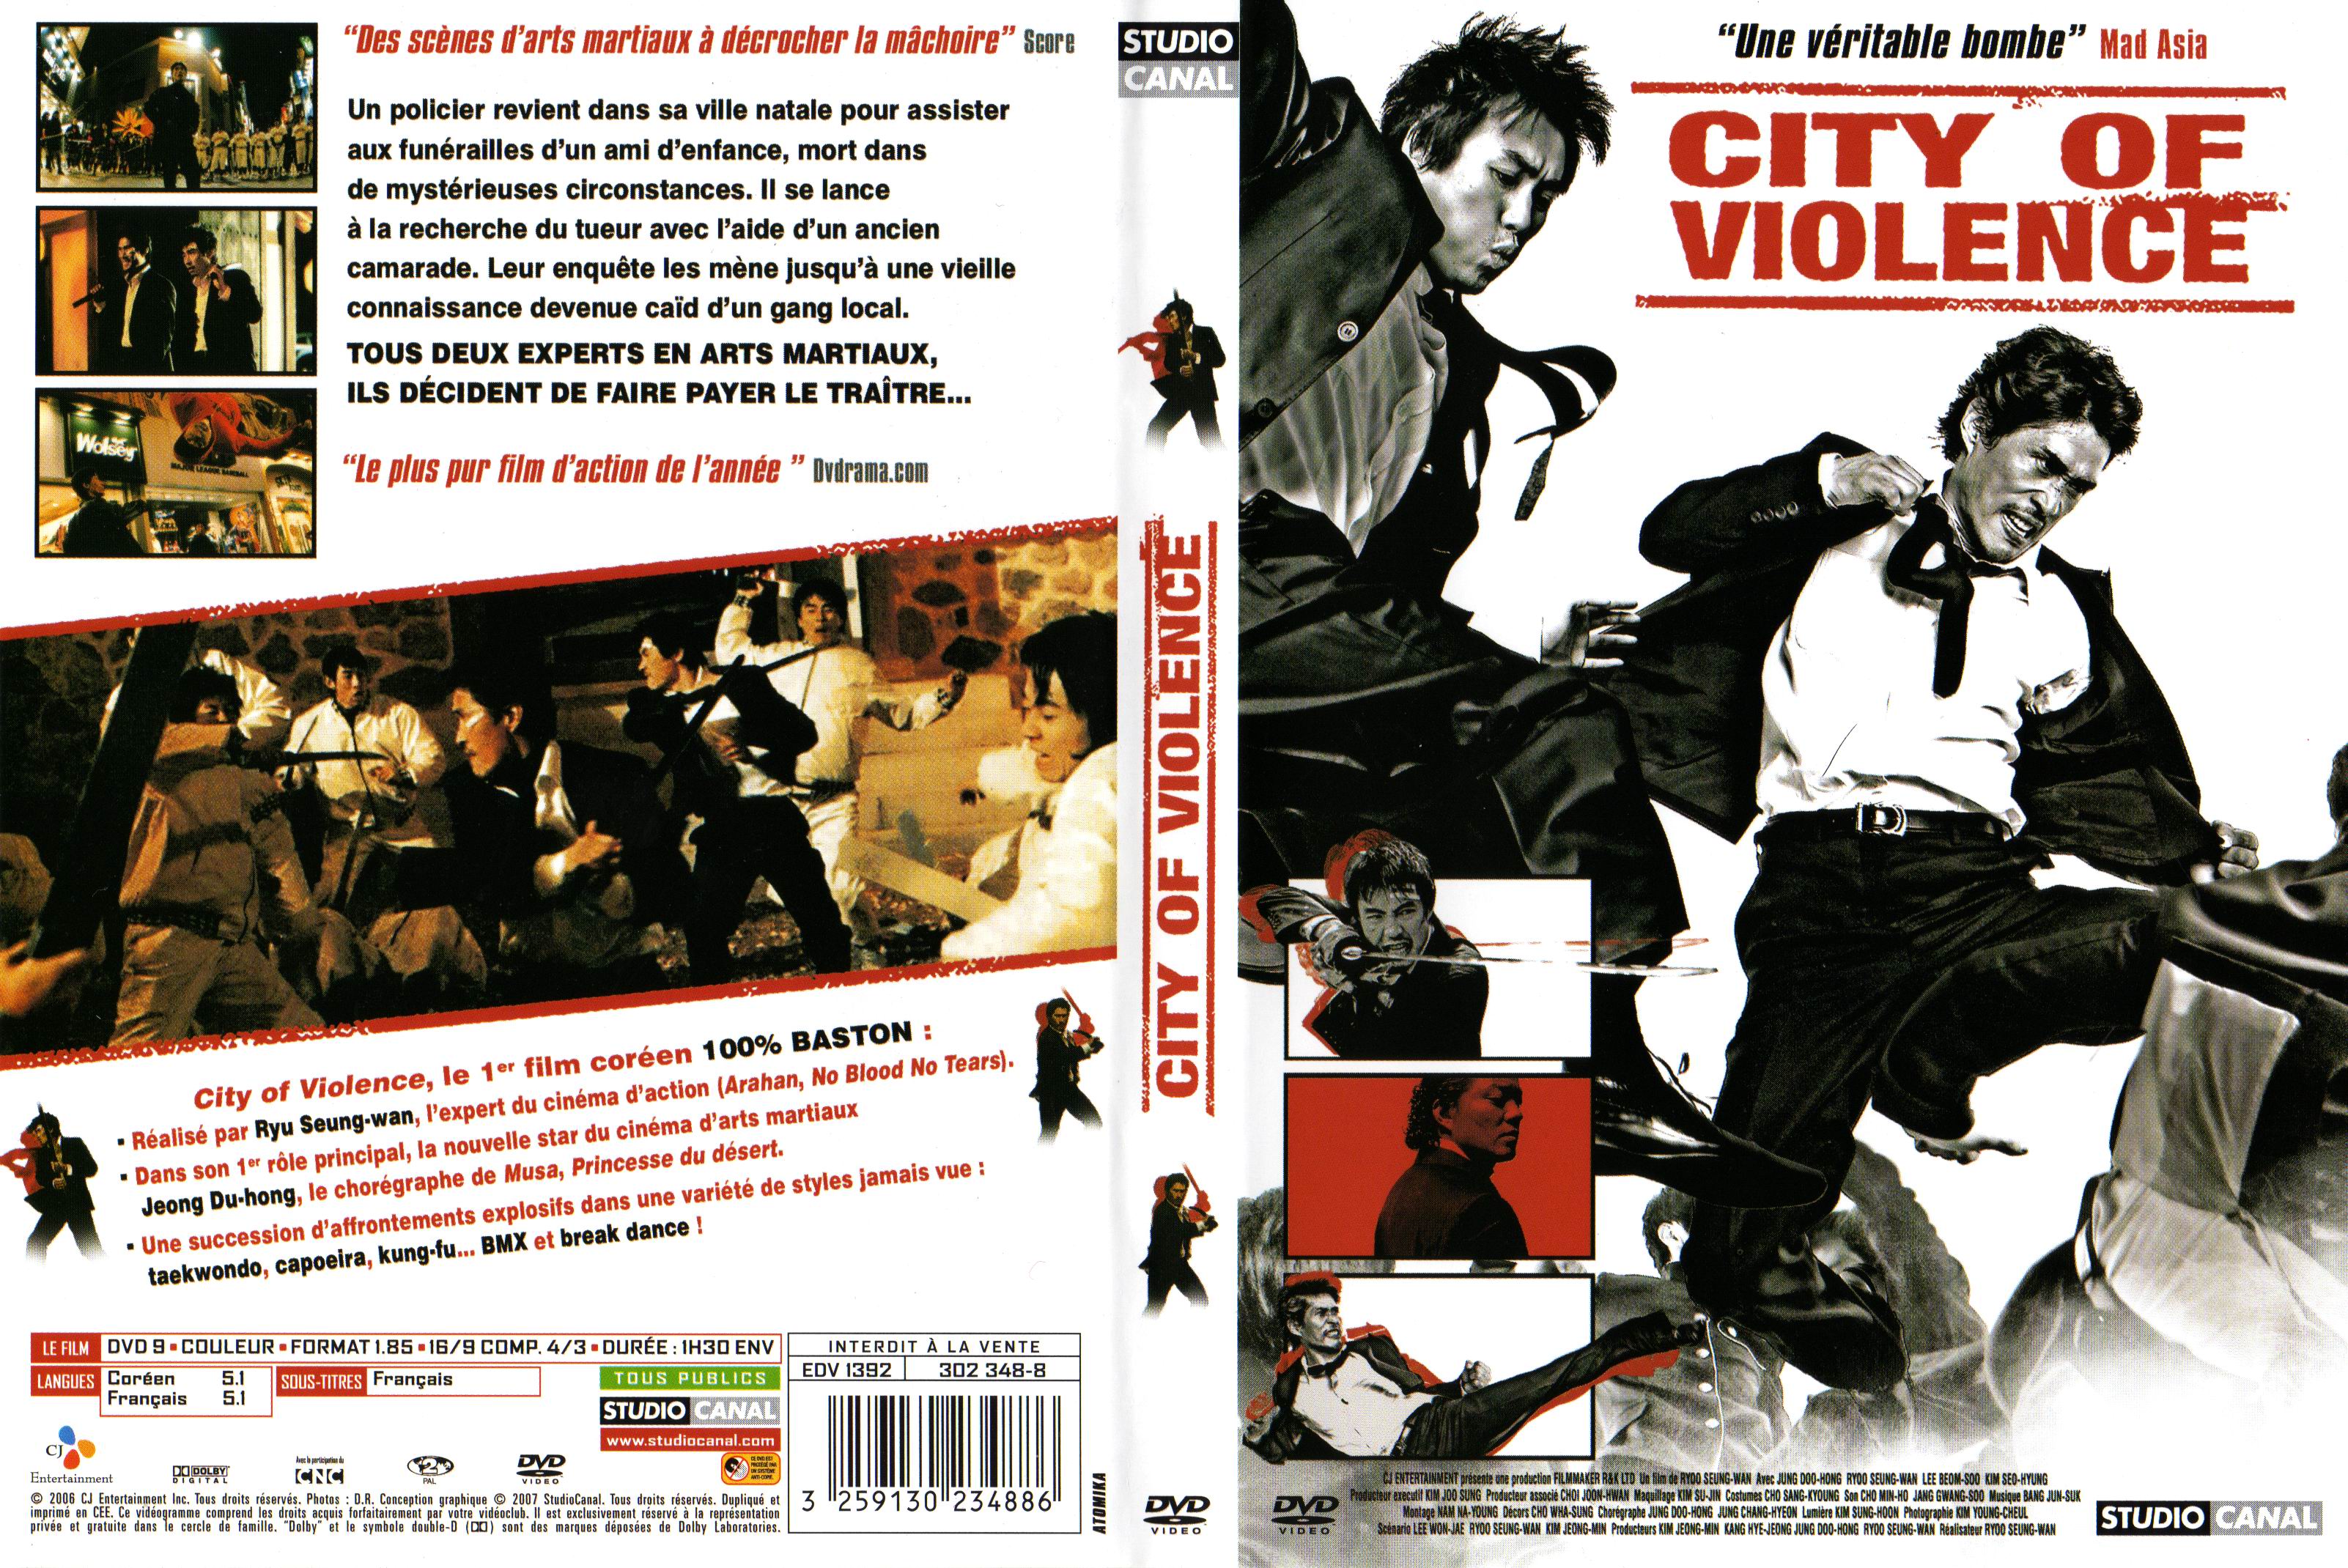 Jaquette DVD City of violence